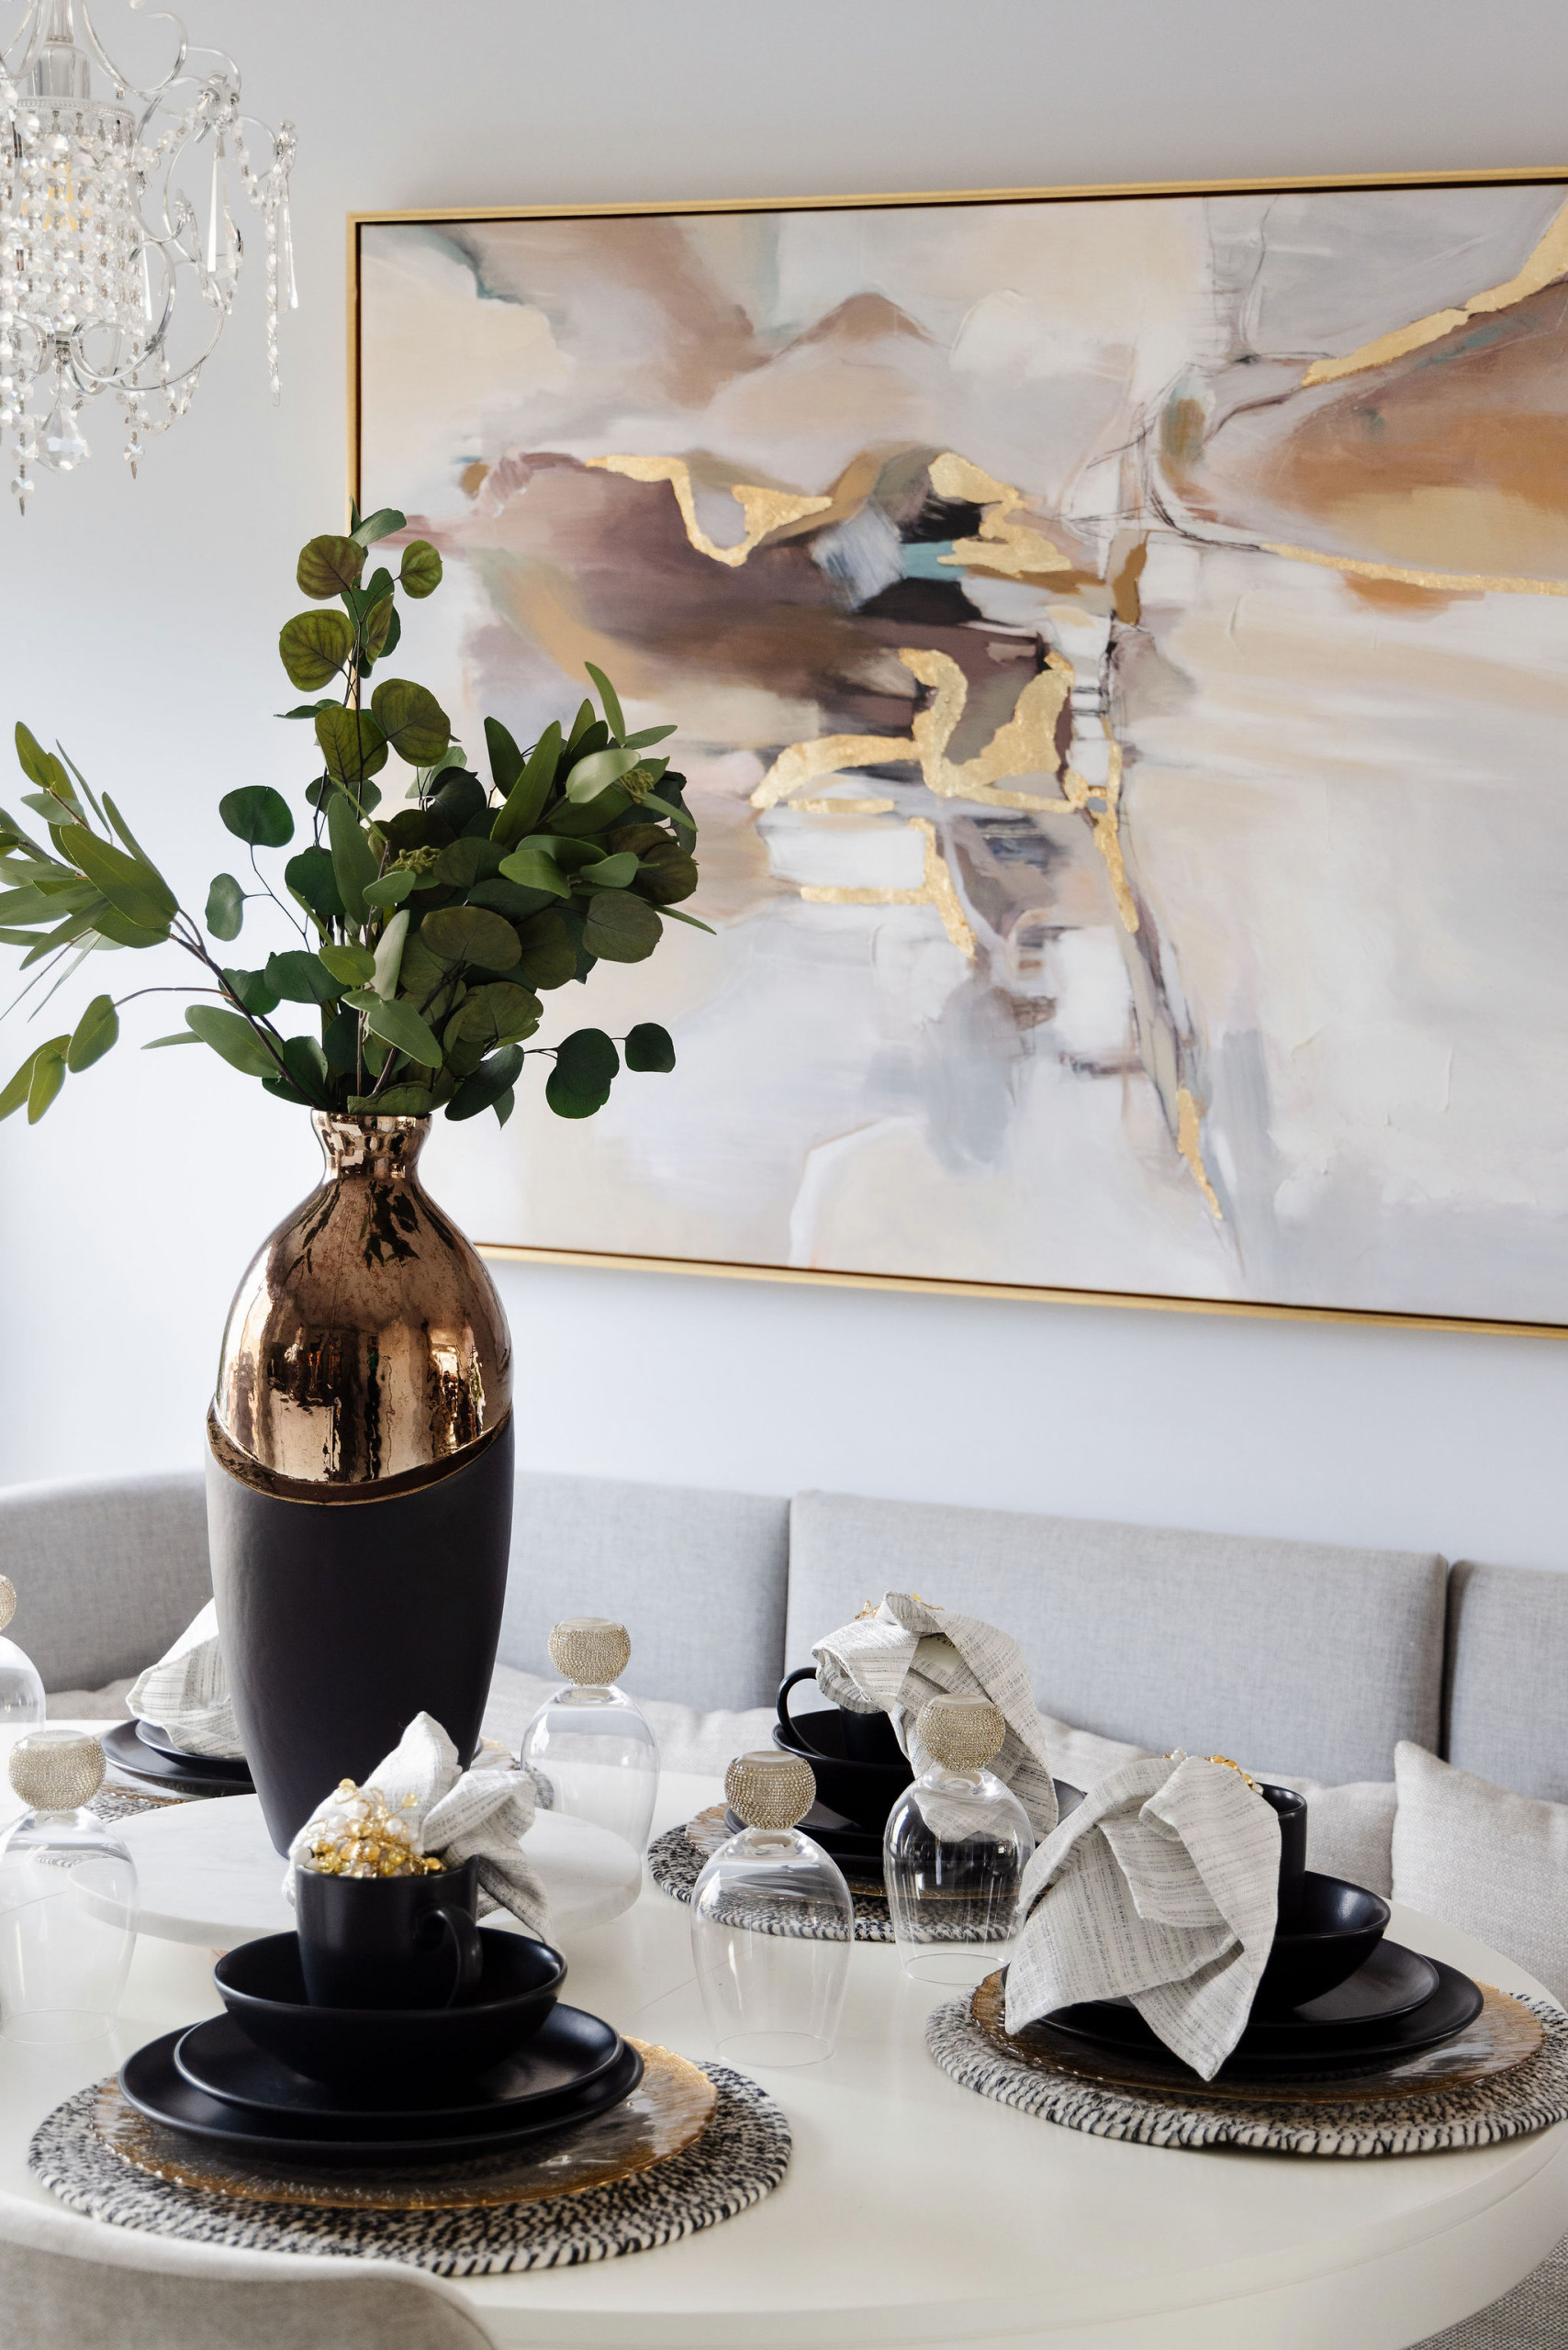 Who knew a condo could be so chic? From the Afro jazz inspired home bar, to the Hollywood glam inspired dining space, there is so much to love. Dive into a glimpse of this beautiful home oasis with a